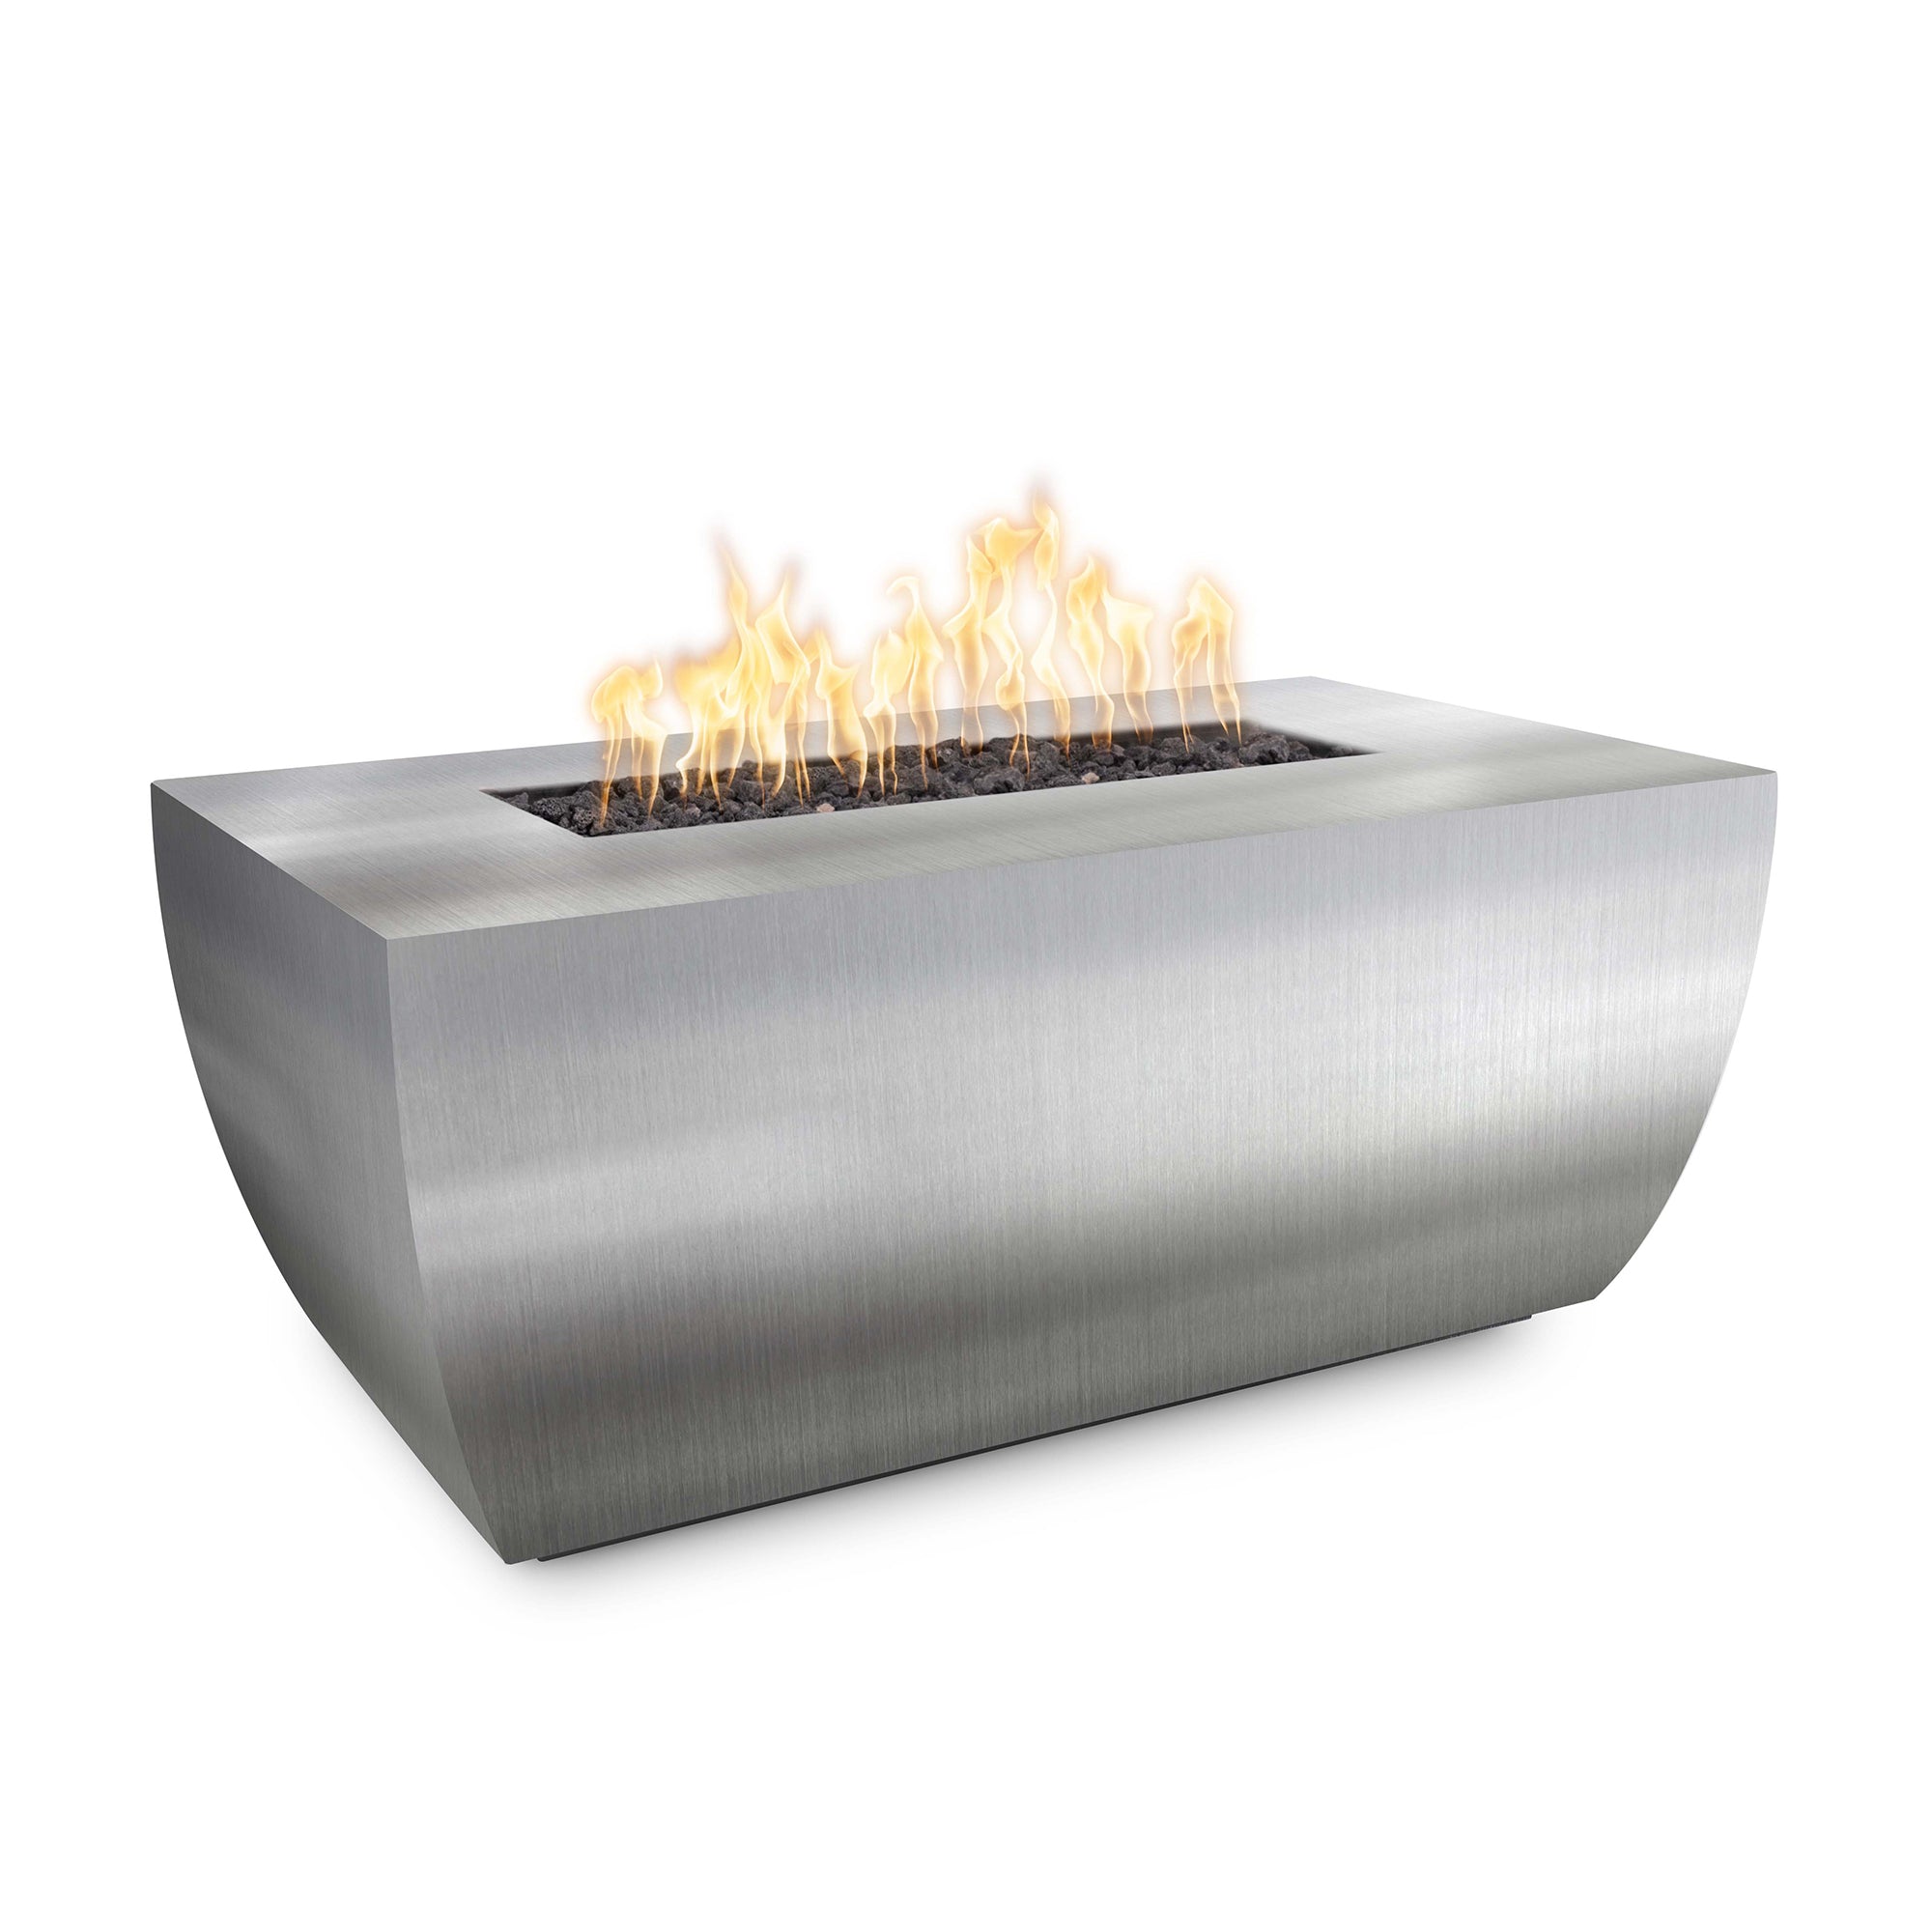 The Outdoor Plus Fire Features The Outdoor Plus 24" Tall 48", 60", 72", 84" Rectangular Avalon Stainless Steel Fire Pit / OPT-AVLSSxx24, OPT-AVLSSxx24FSML, OPT-AVLSSxx24FSEN, OPT-AVLSSxx24E12V, OPT-AVLSSxx24EKIT